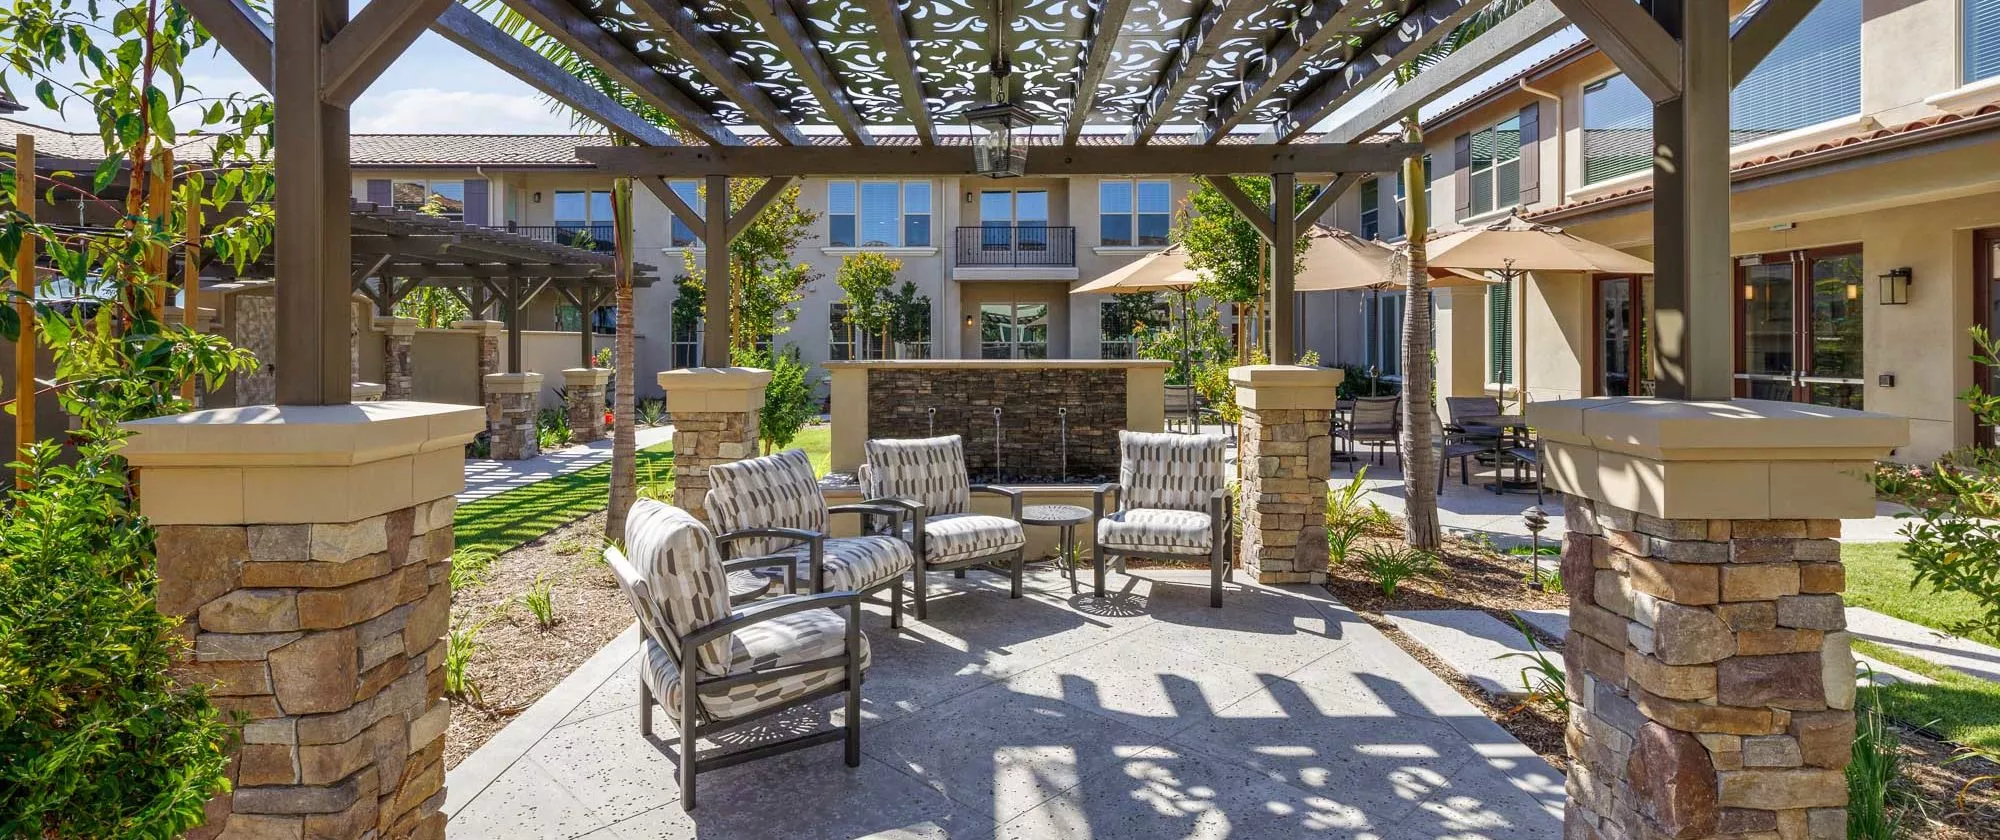 Garden and patio with patio furniture